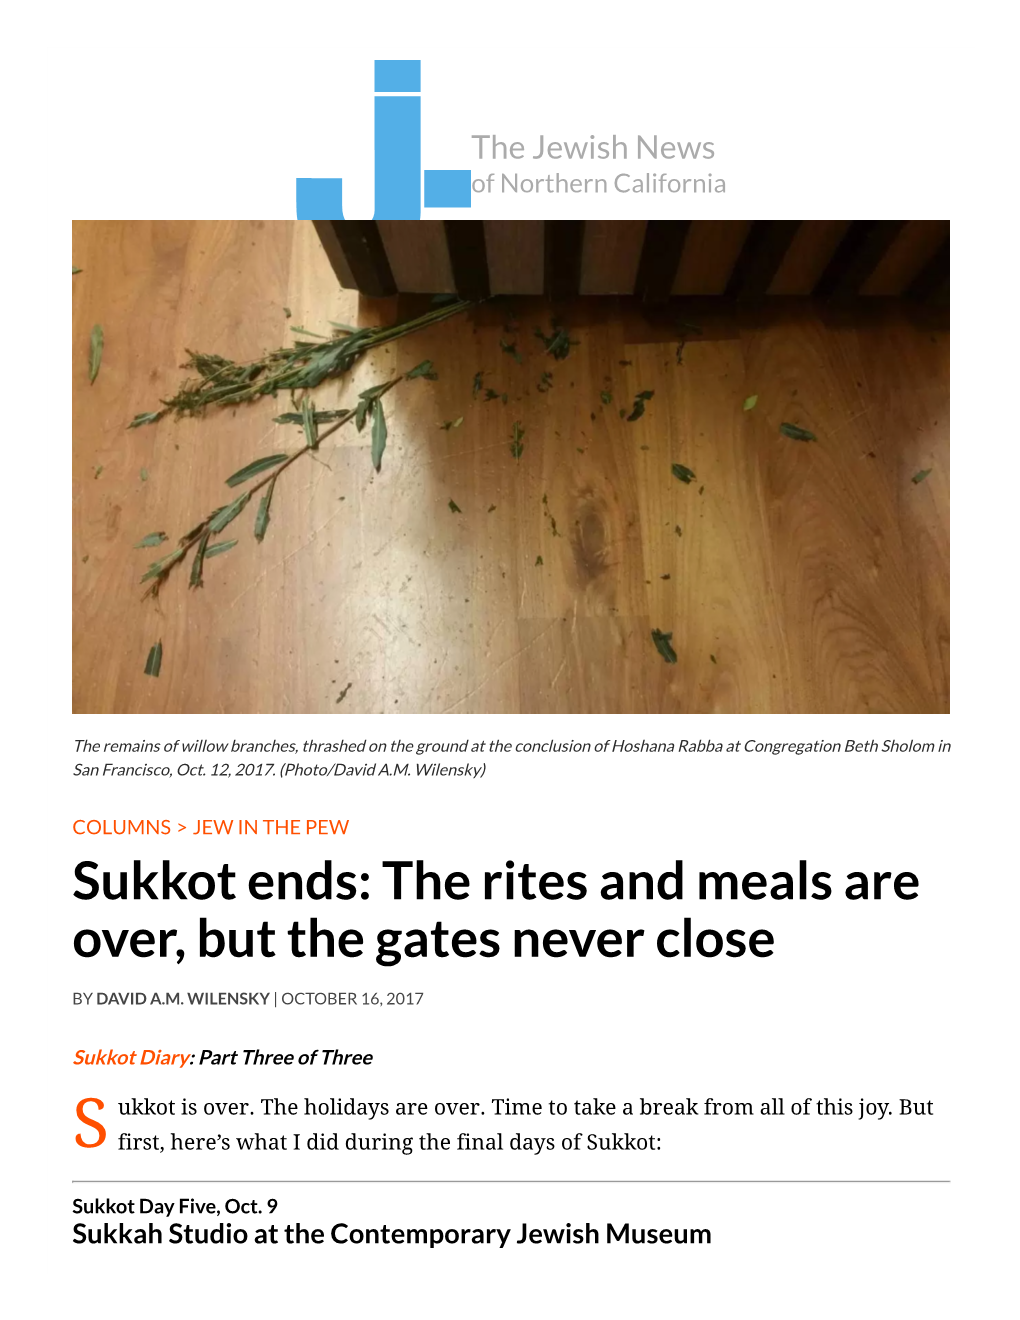 Sukkot Ends: the Rites and Meals Are Over, but the Gates Never Close